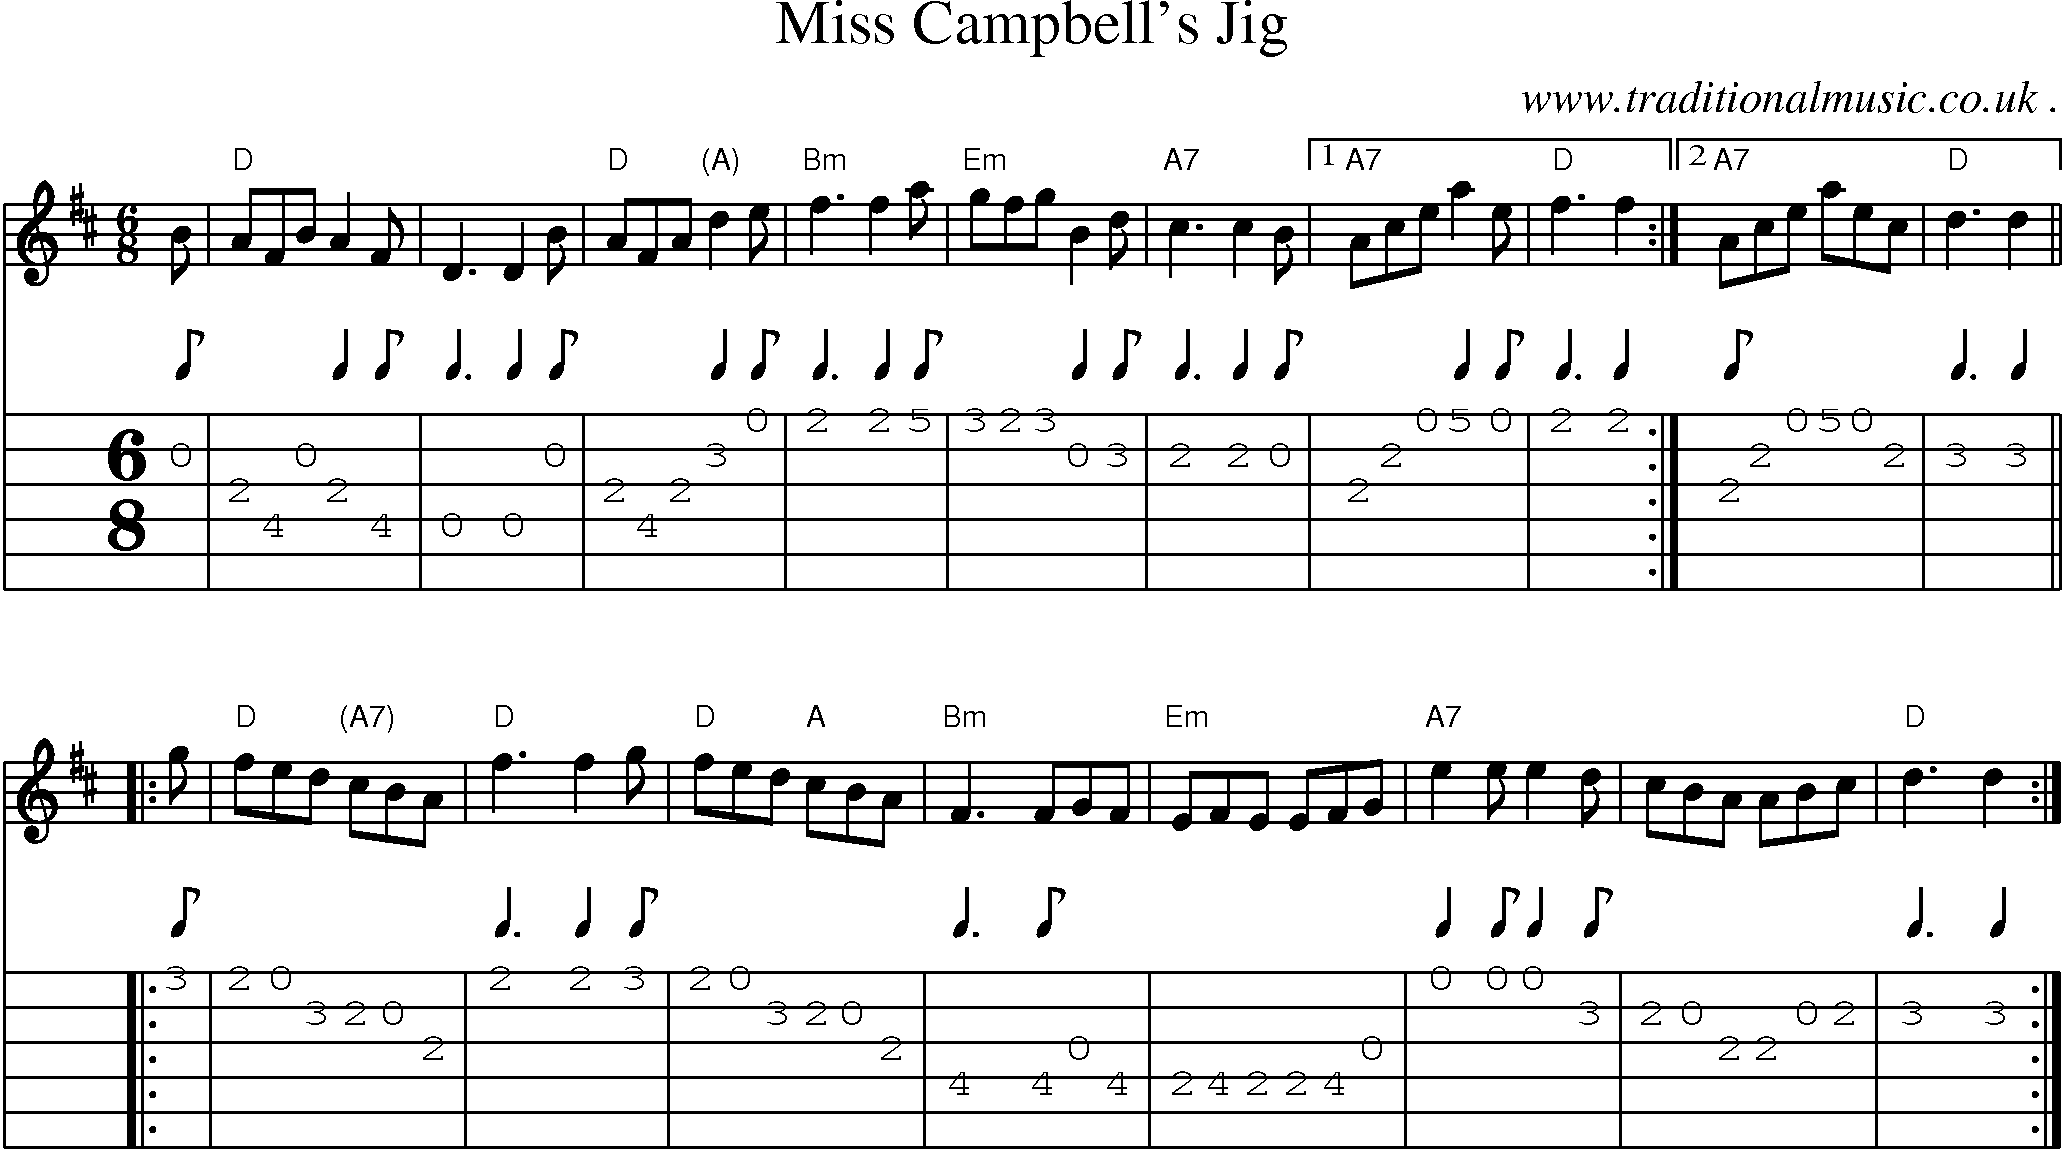 Sheet-music  score, Chords and Guitar Tabs for Miss Campbells Jig